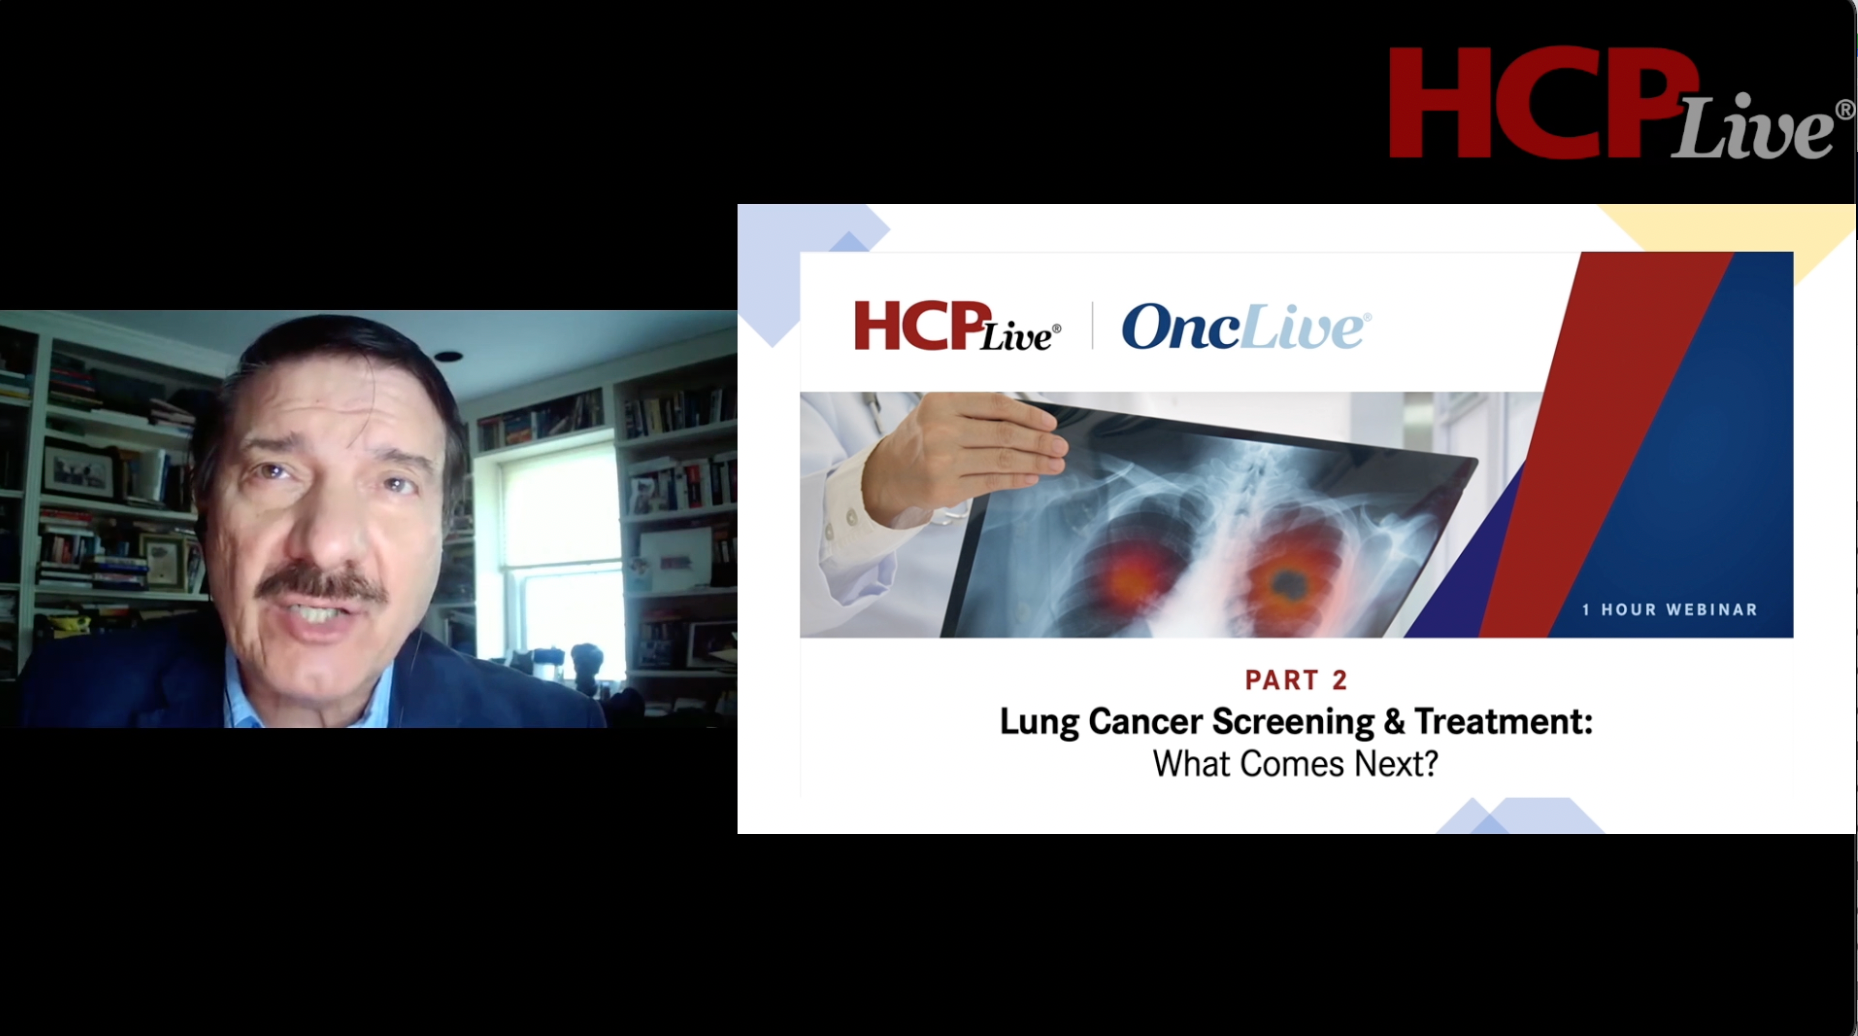 Lung Cancer Screening & Treatment: What Comes Next?